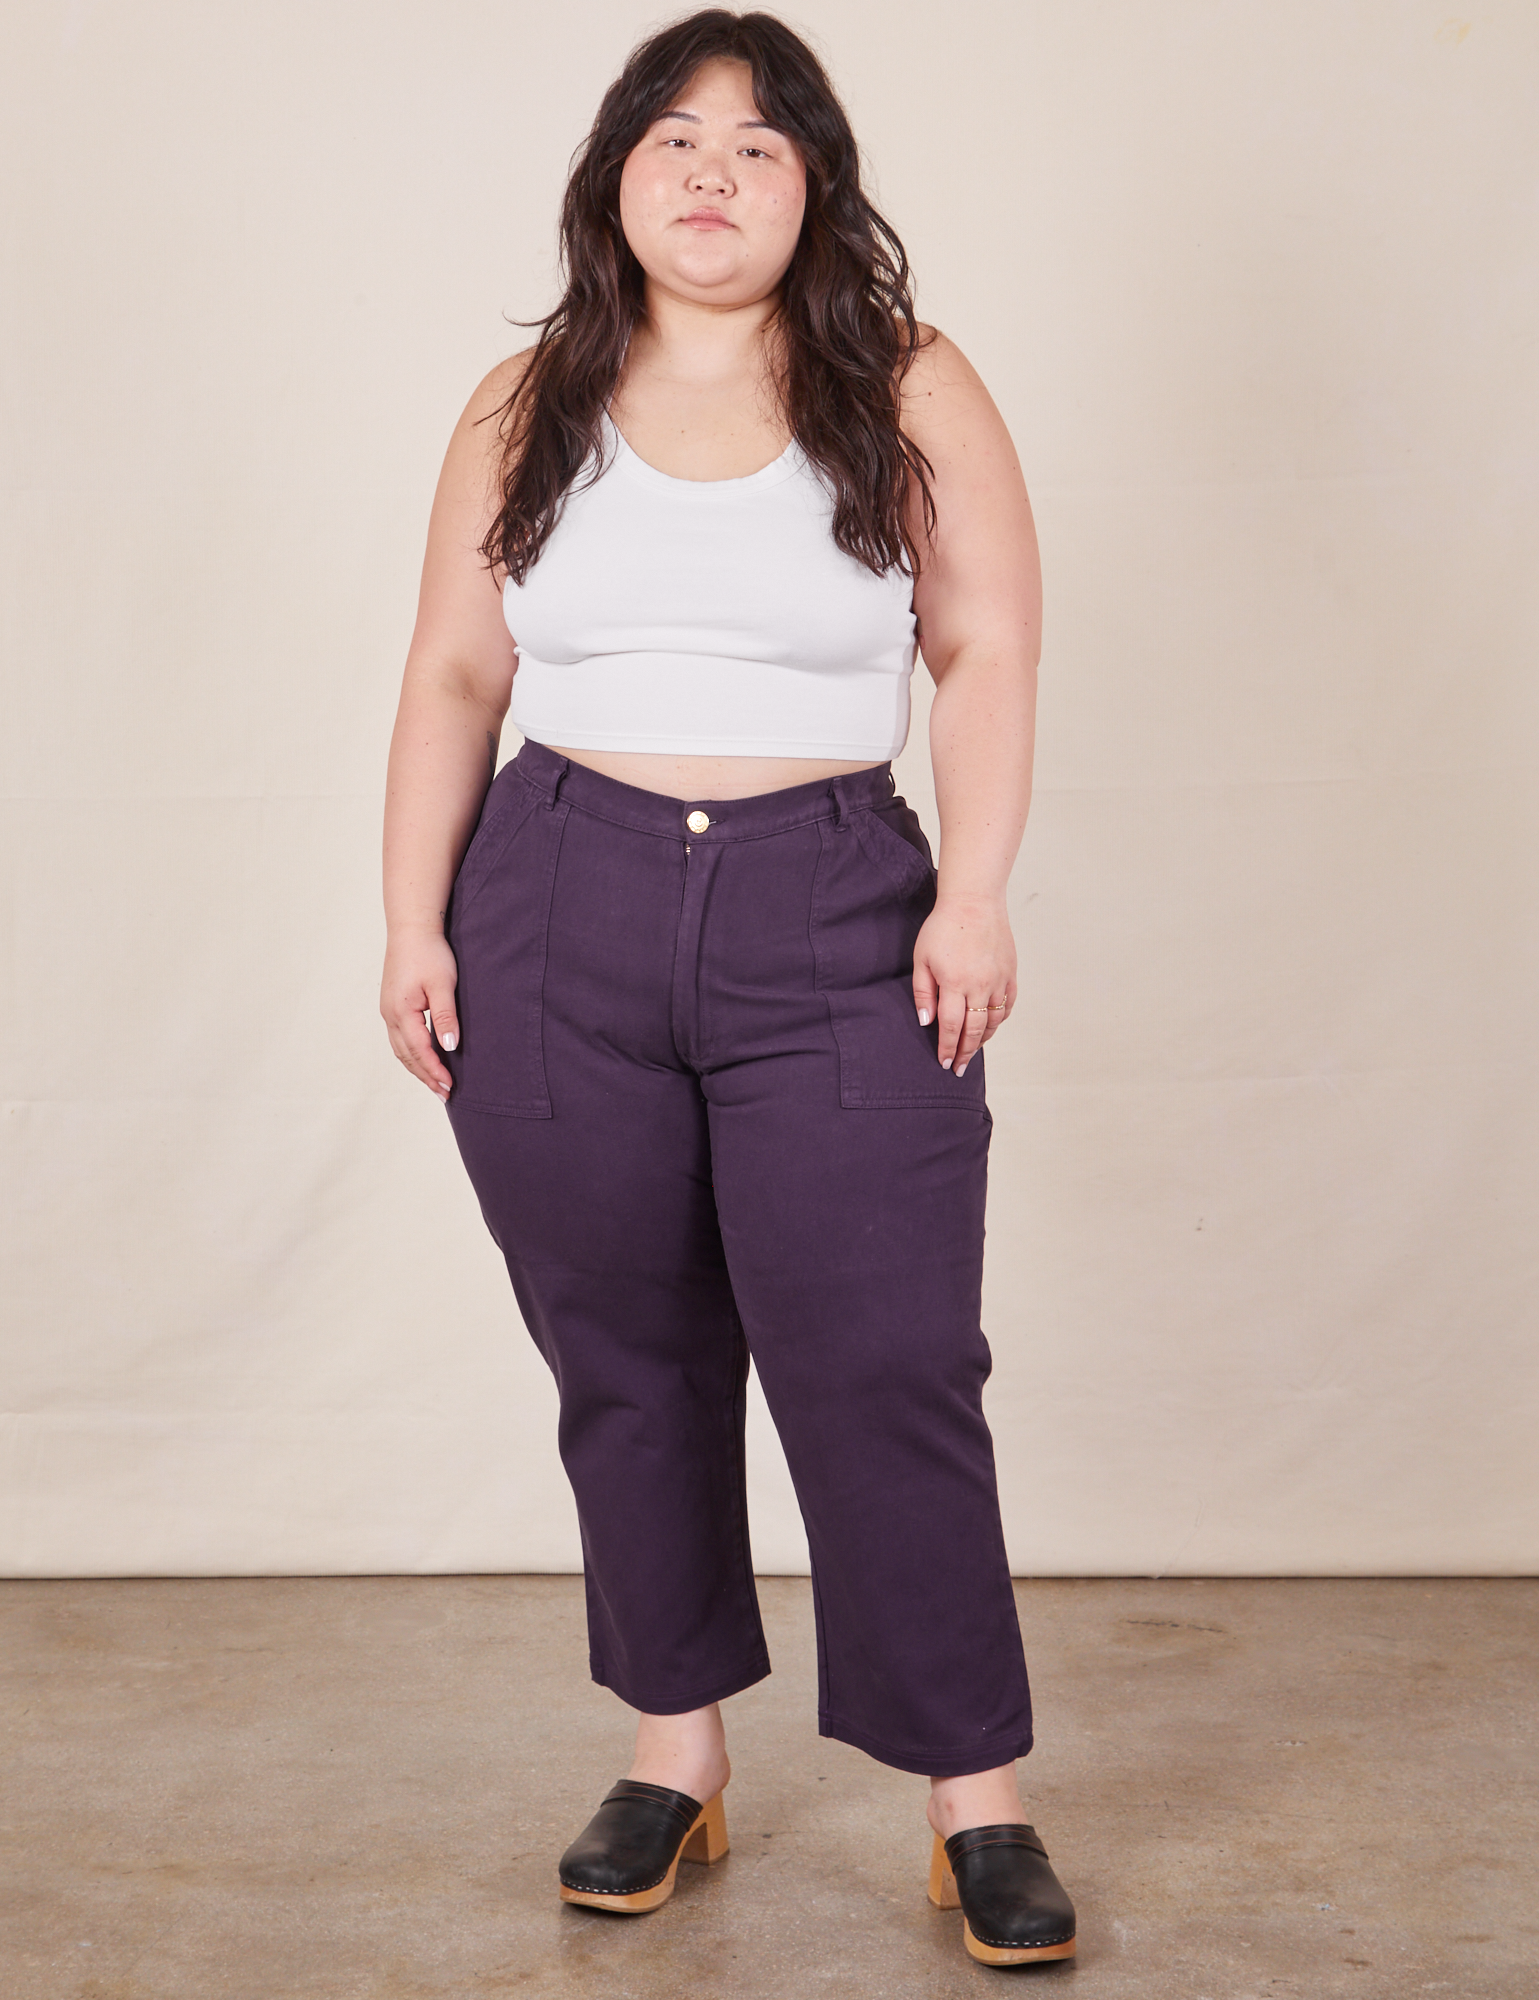 Ashley is 5&#39;7&quot; and wearing 1XL Petite Work Pants in Nebula Purple